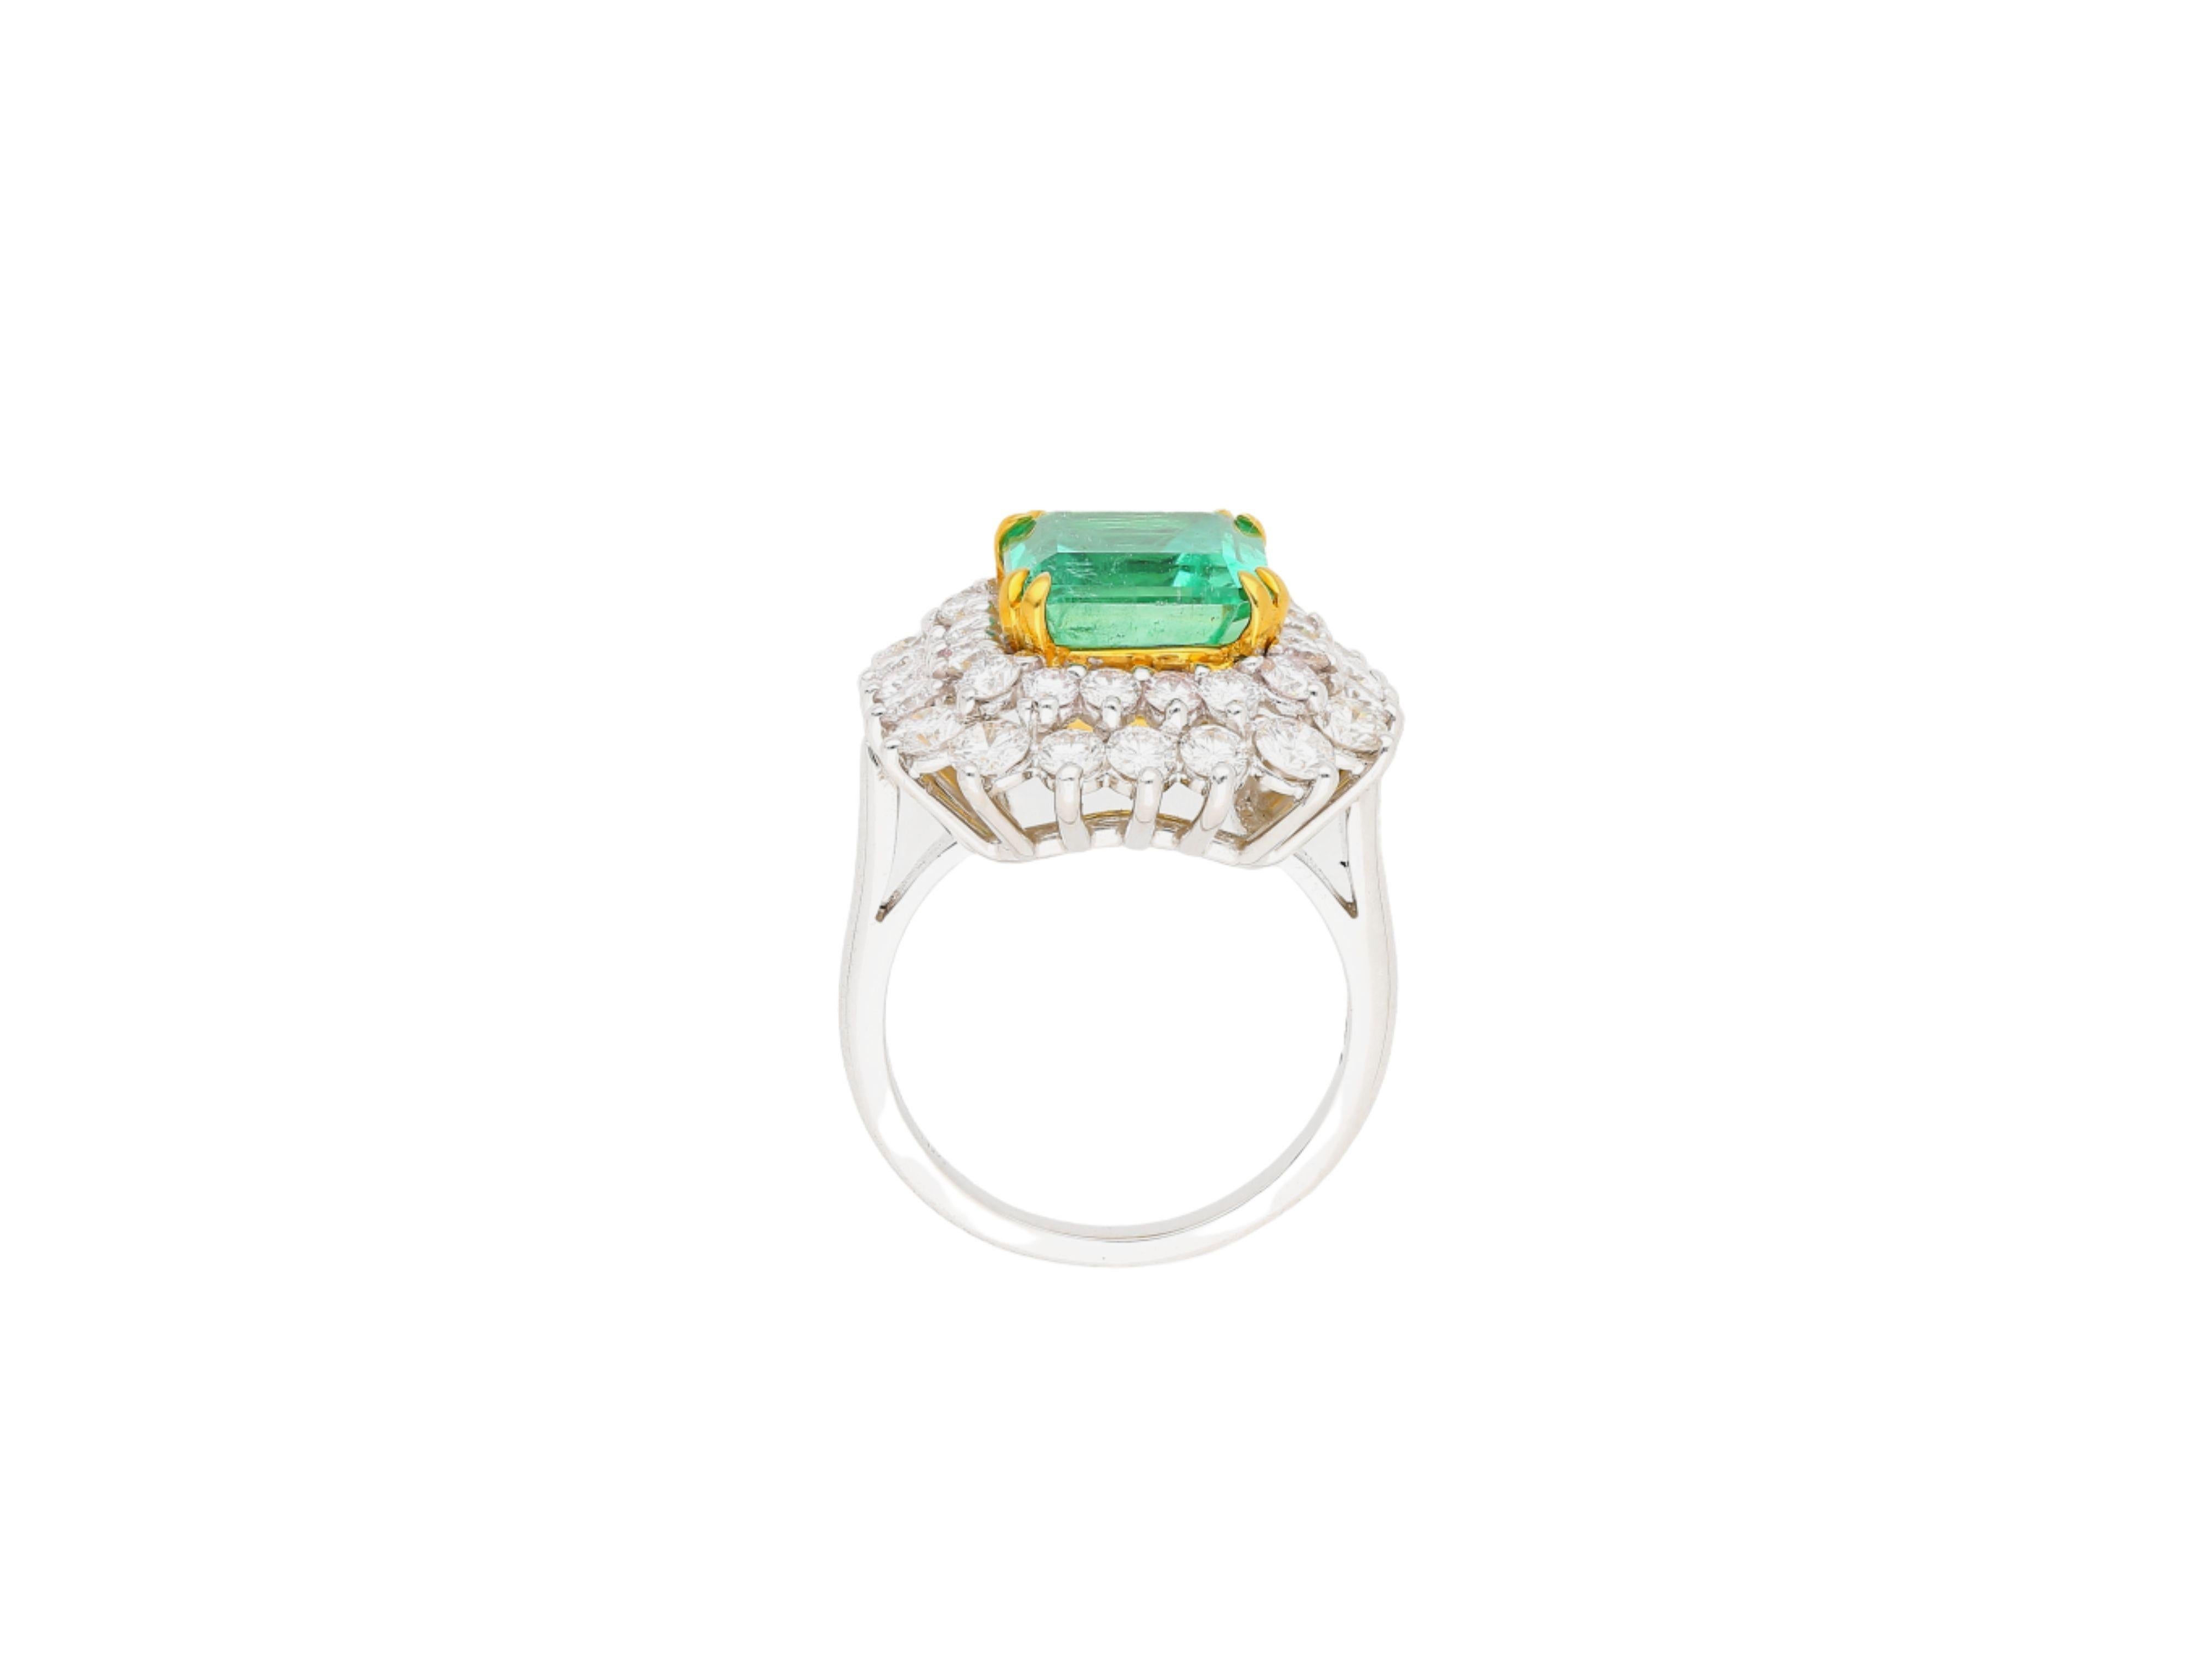 Emerald Cut 4.30 Carat Emerald-Cut Colombian Emerald Insignificant Oil GRS and Diamond Ring For Sale